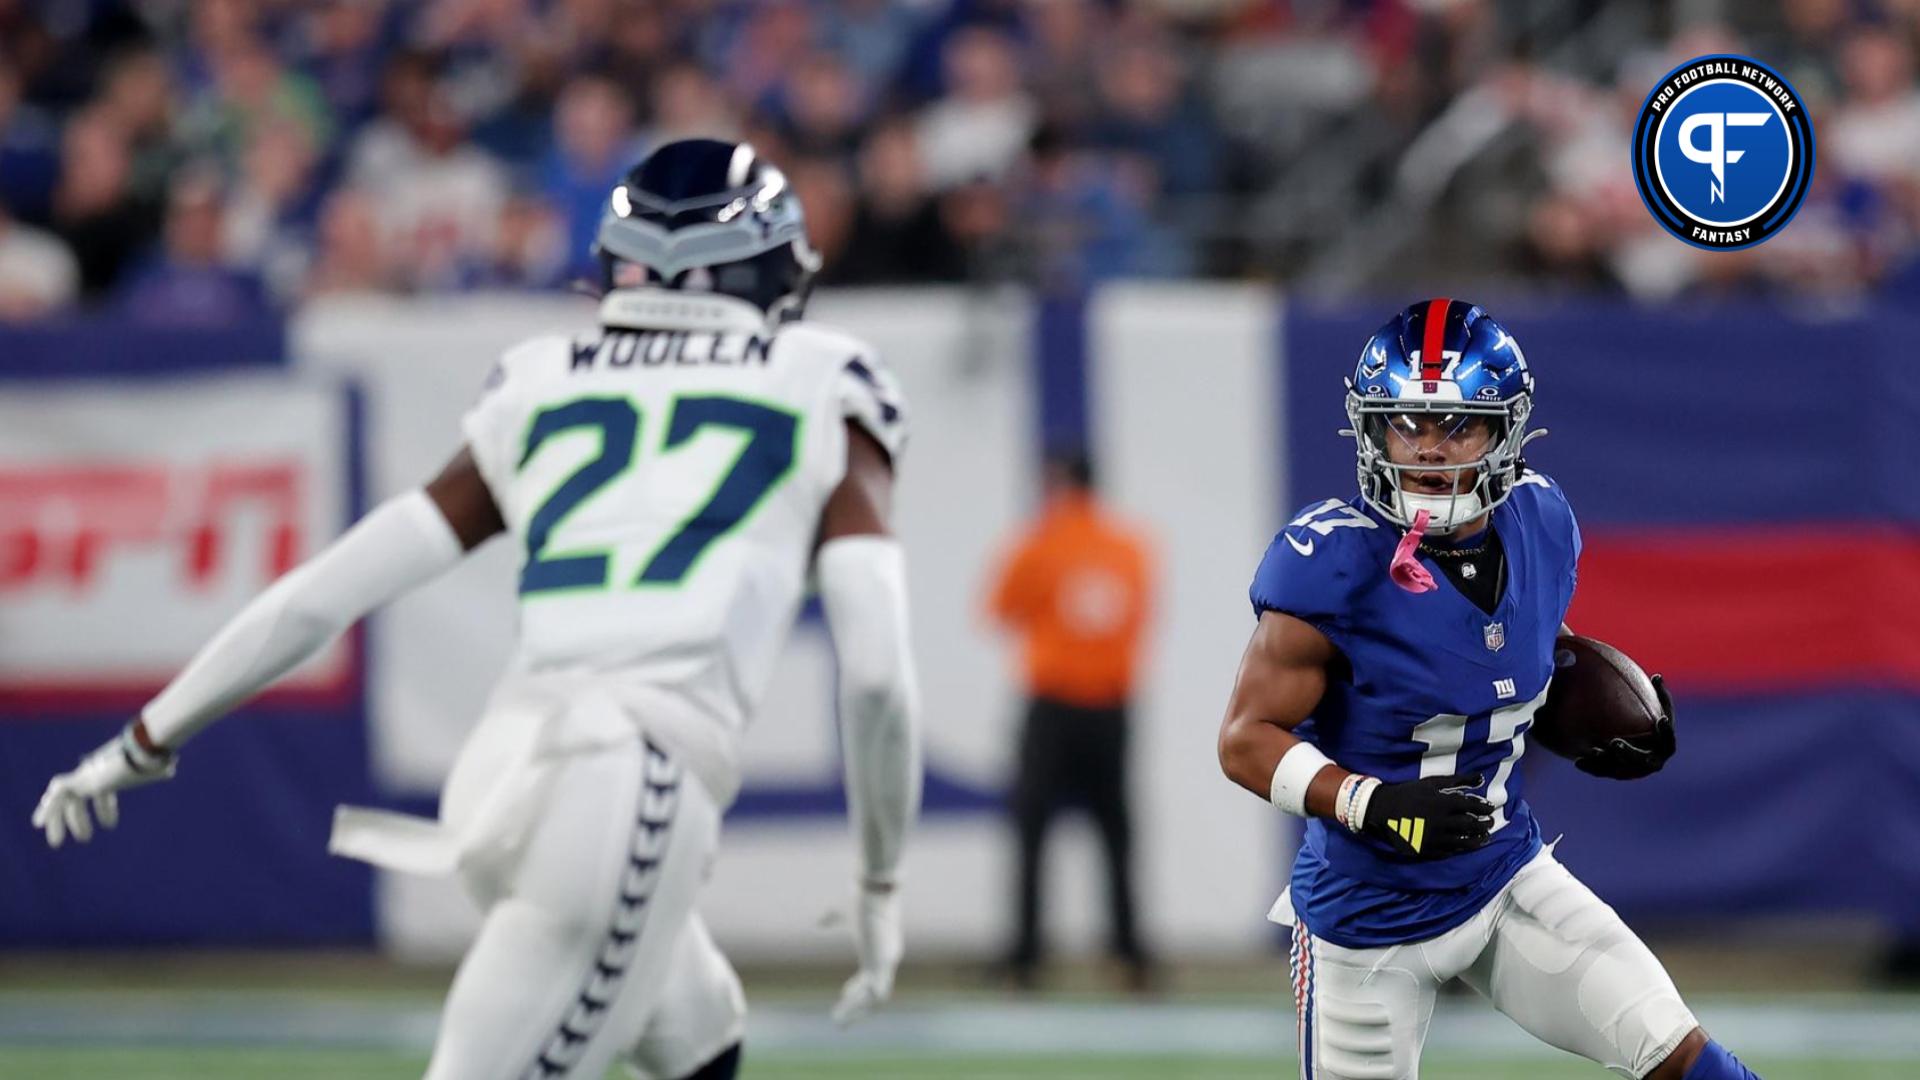 New York Giants WR Wan'Dale Robinson (17) runs with the ball against the Seattle Seahawks.